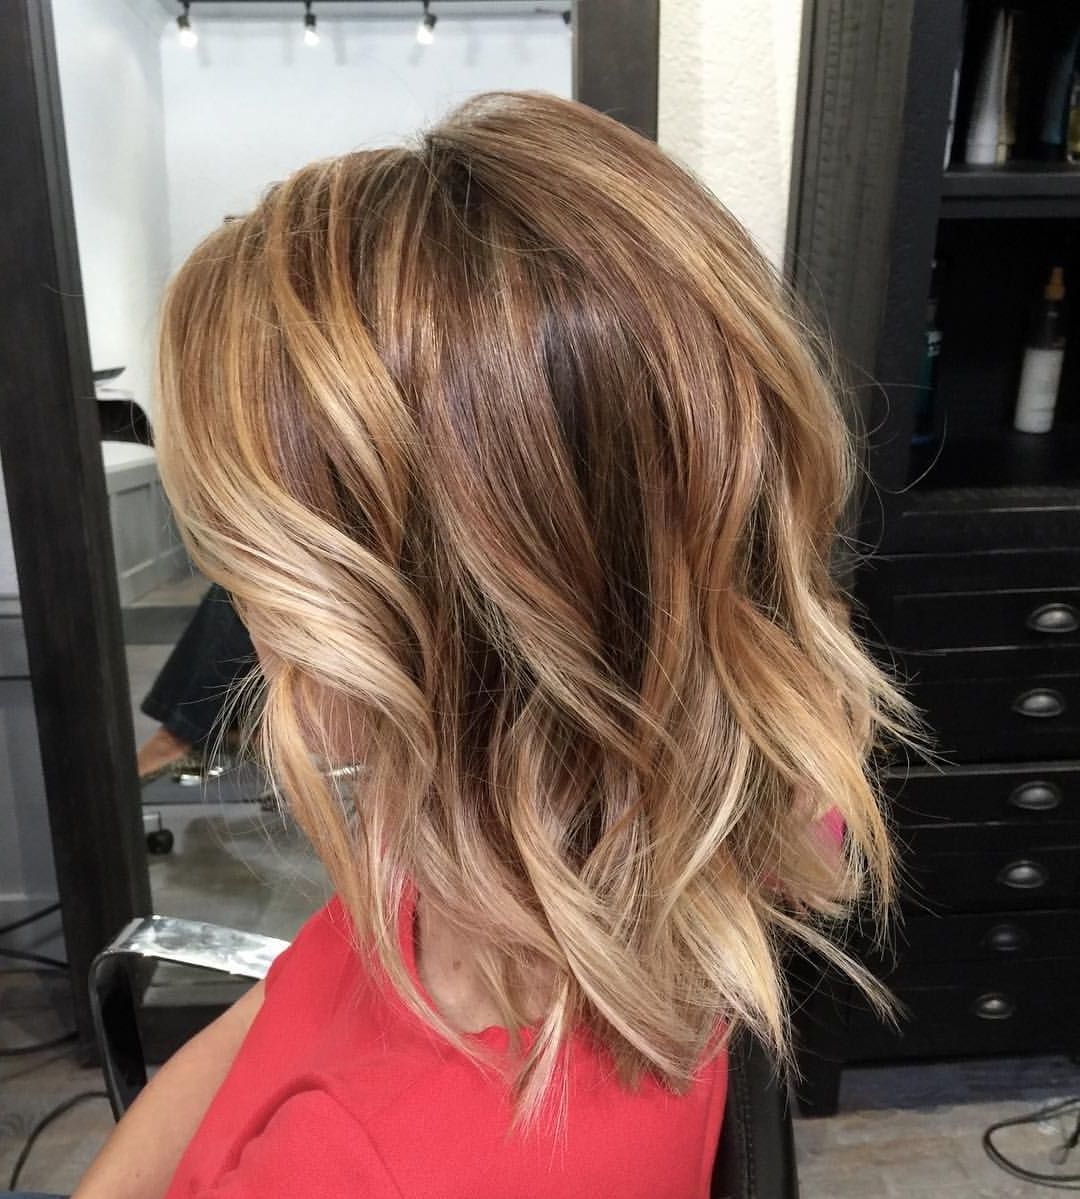 Cute Hairstyle – Bronde Bob With Beach Waves (View 1 of 20)